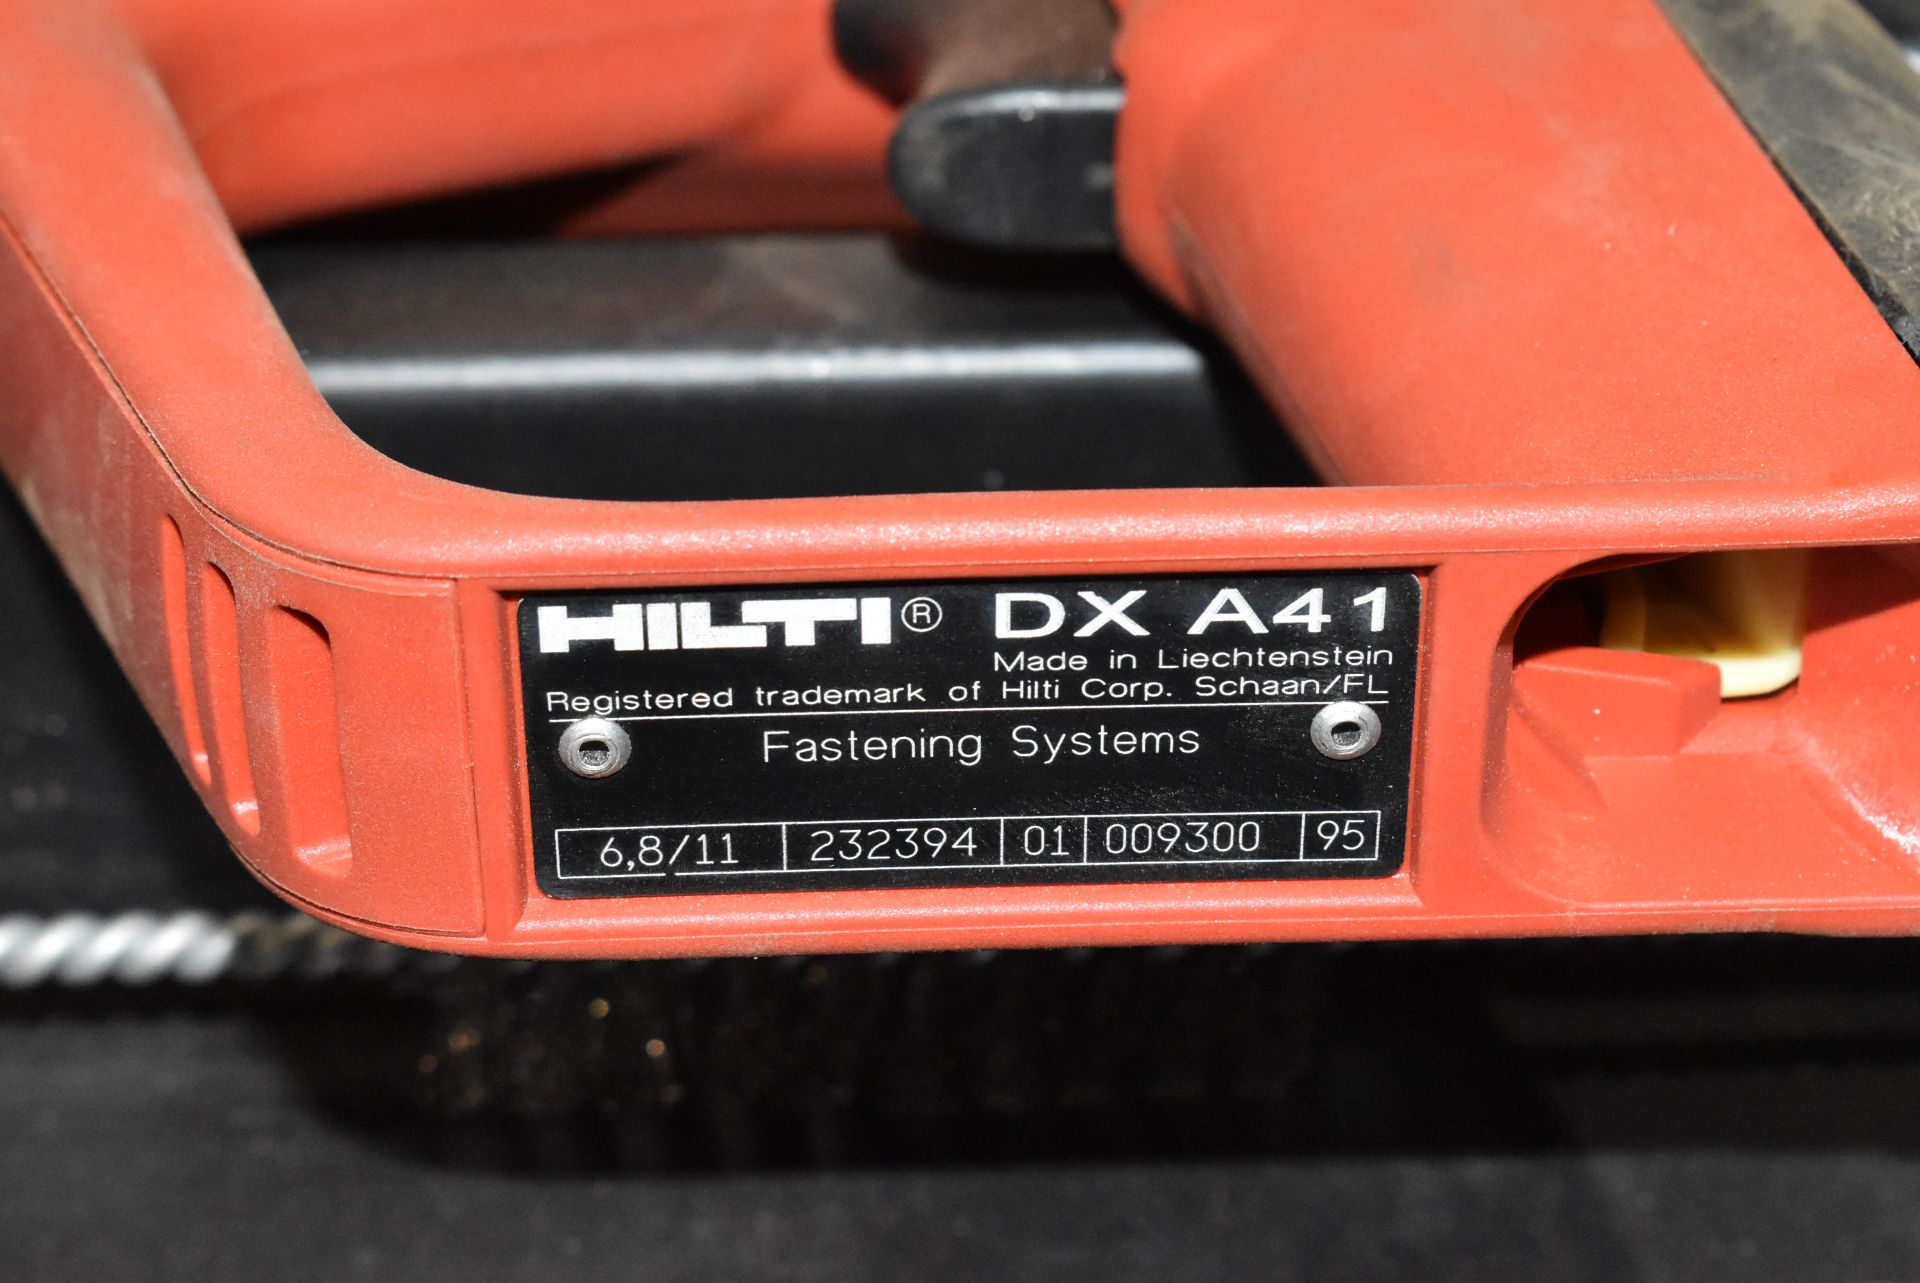 HILTI DX A41 FULLY AUTOMATIC POWER-ACTUATED FASTENING TOOL WITH HILTI X-AM72 NAIL MAGAZINE - Image 3 of 4